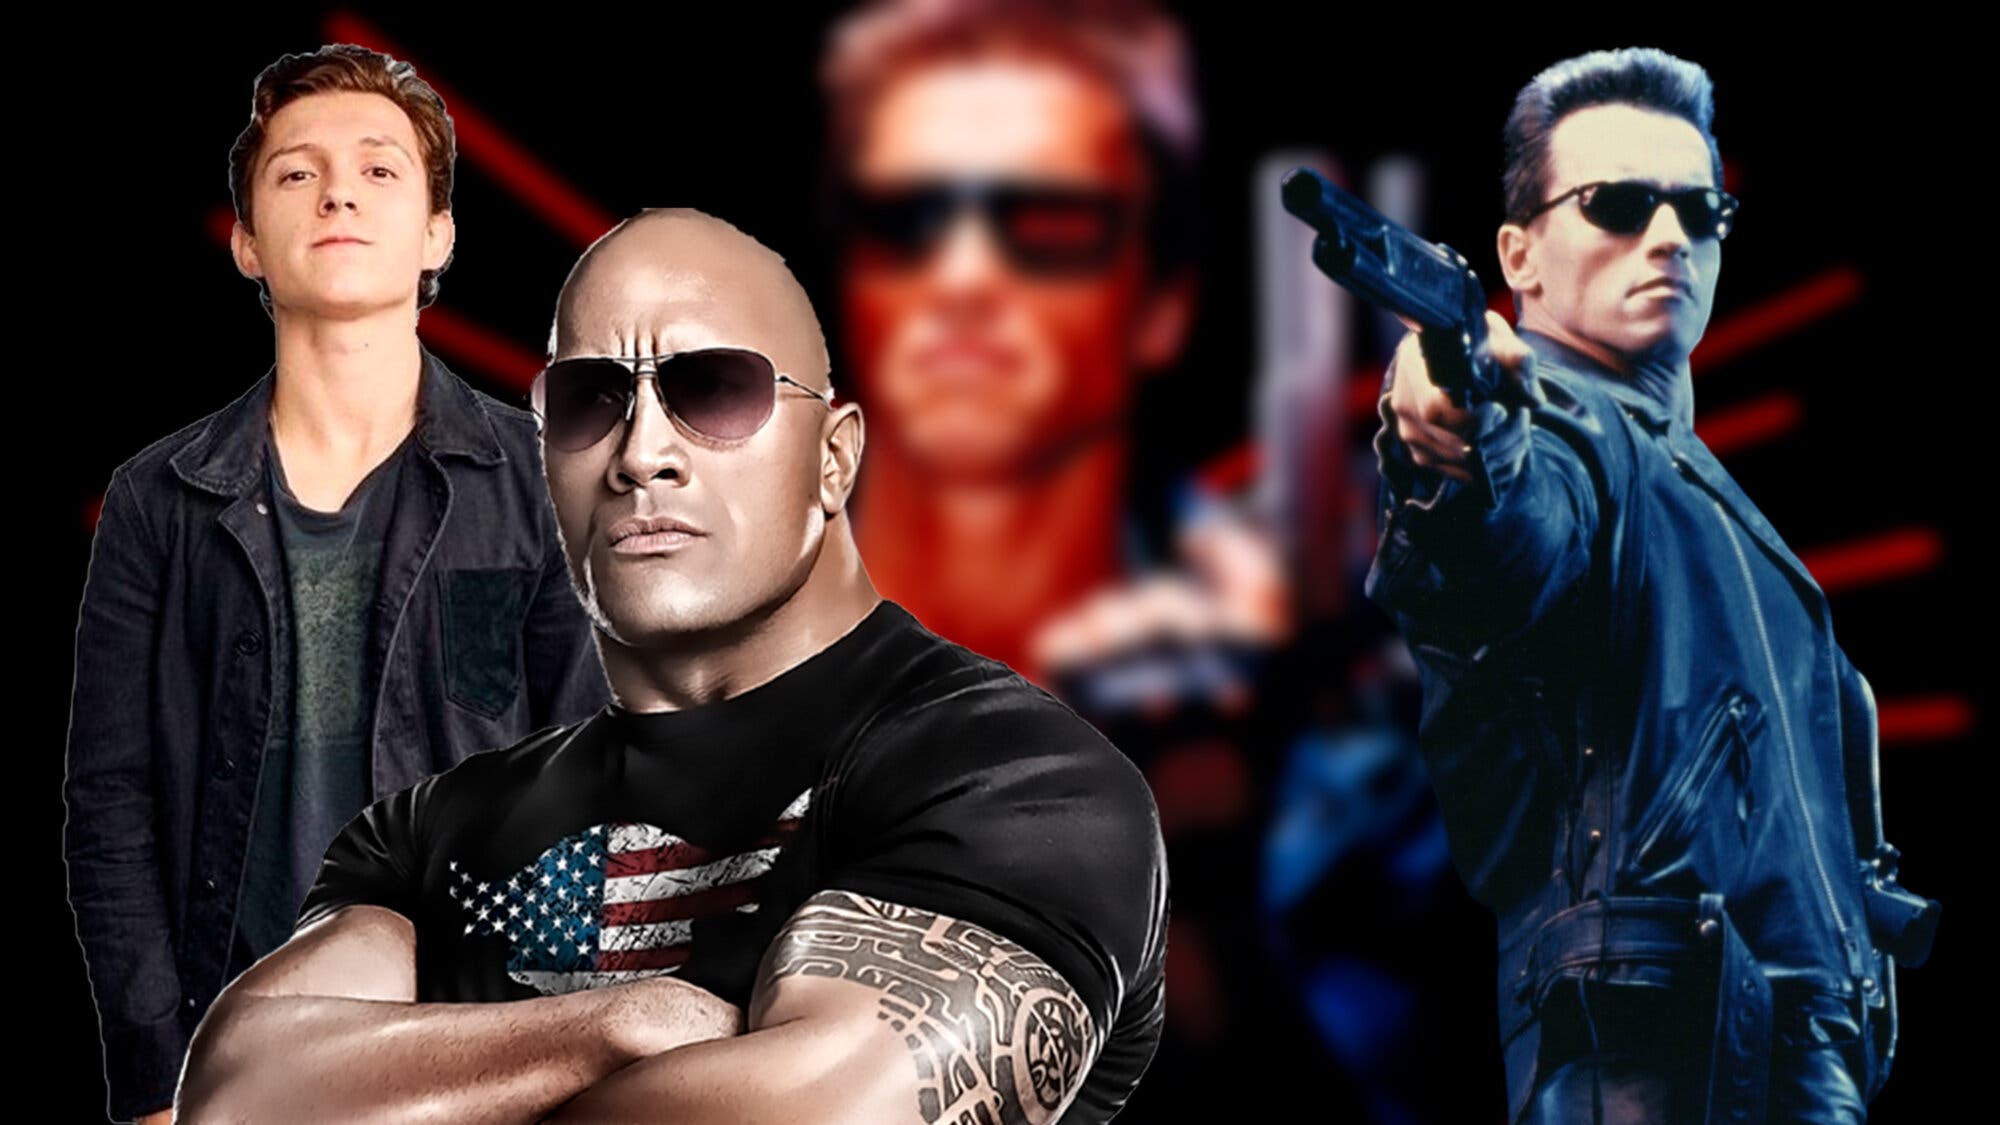 The Power of AI imagines what the Terminator remake would look like with Dwayne Johnson and Tom Holland as protagonists